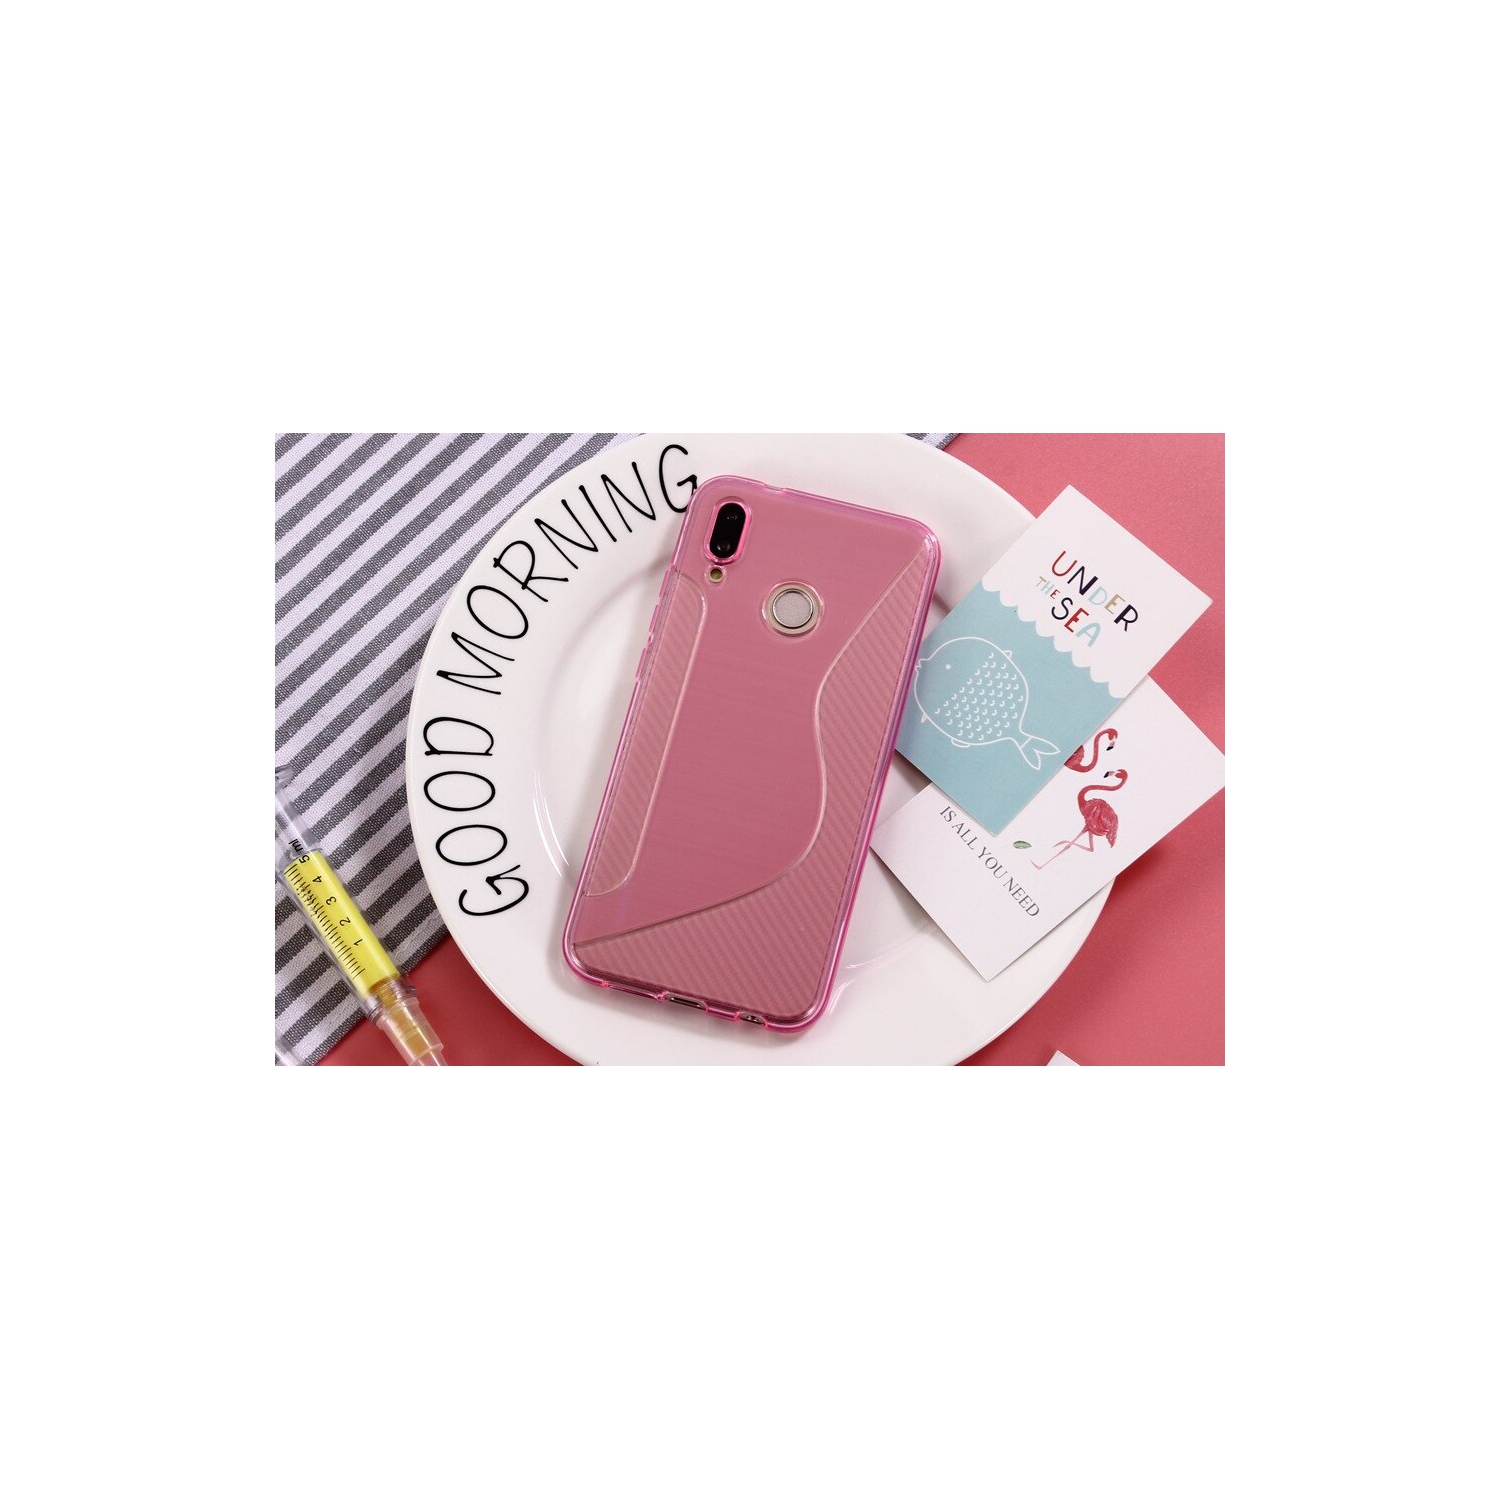 【CSmart】Ultra Thin Soft TPU Silicone Jelly Bumper Back Cover Case for Samsung Galaxy A20, Hot Pink